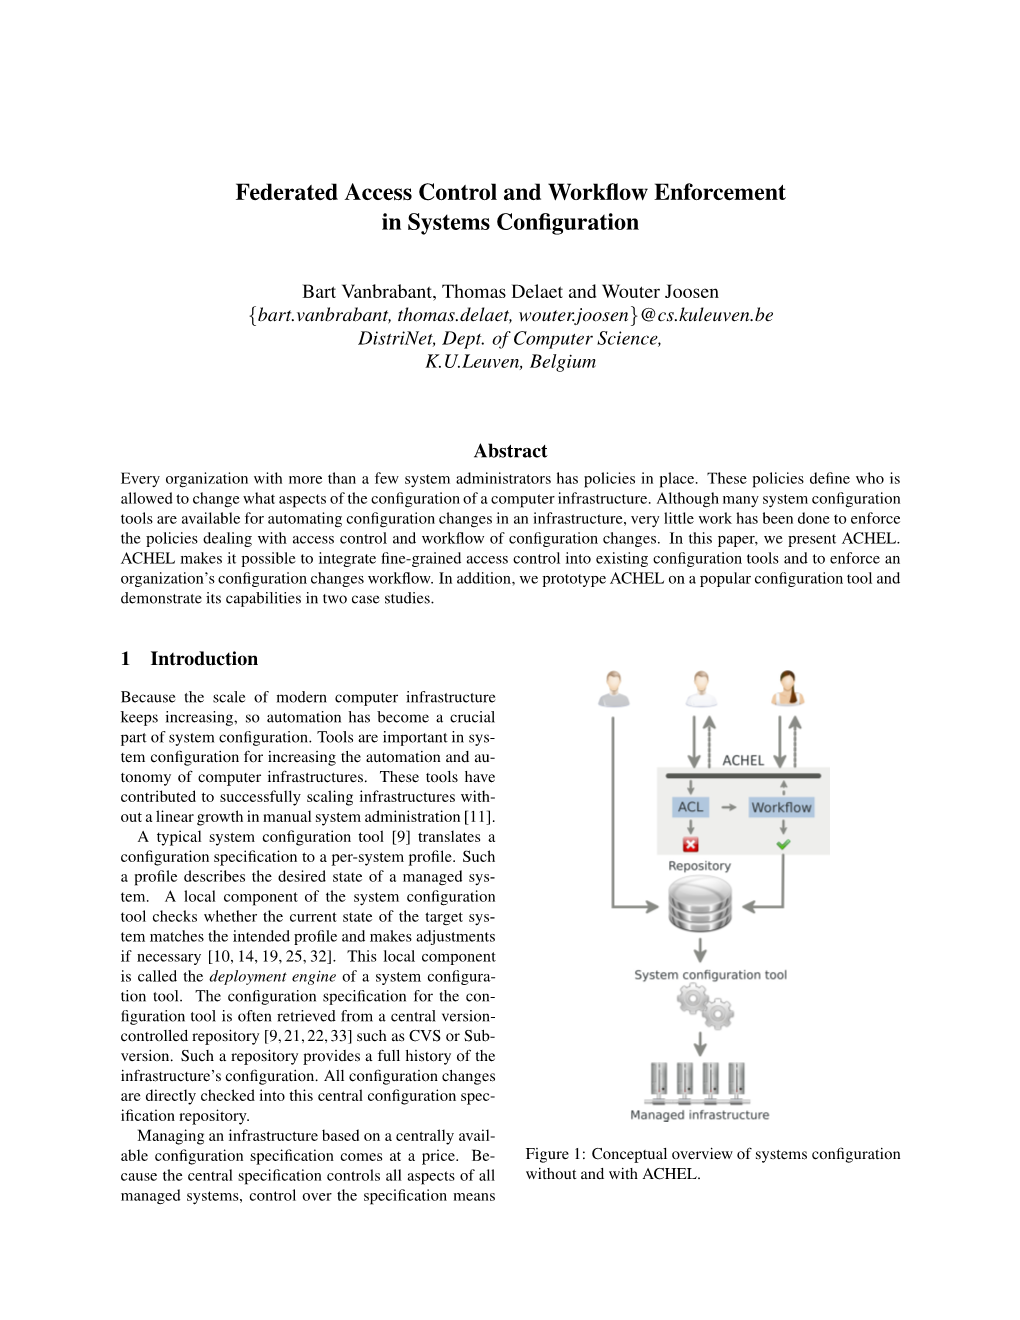 Federated Access Control and Workflow Enforcement in Systems